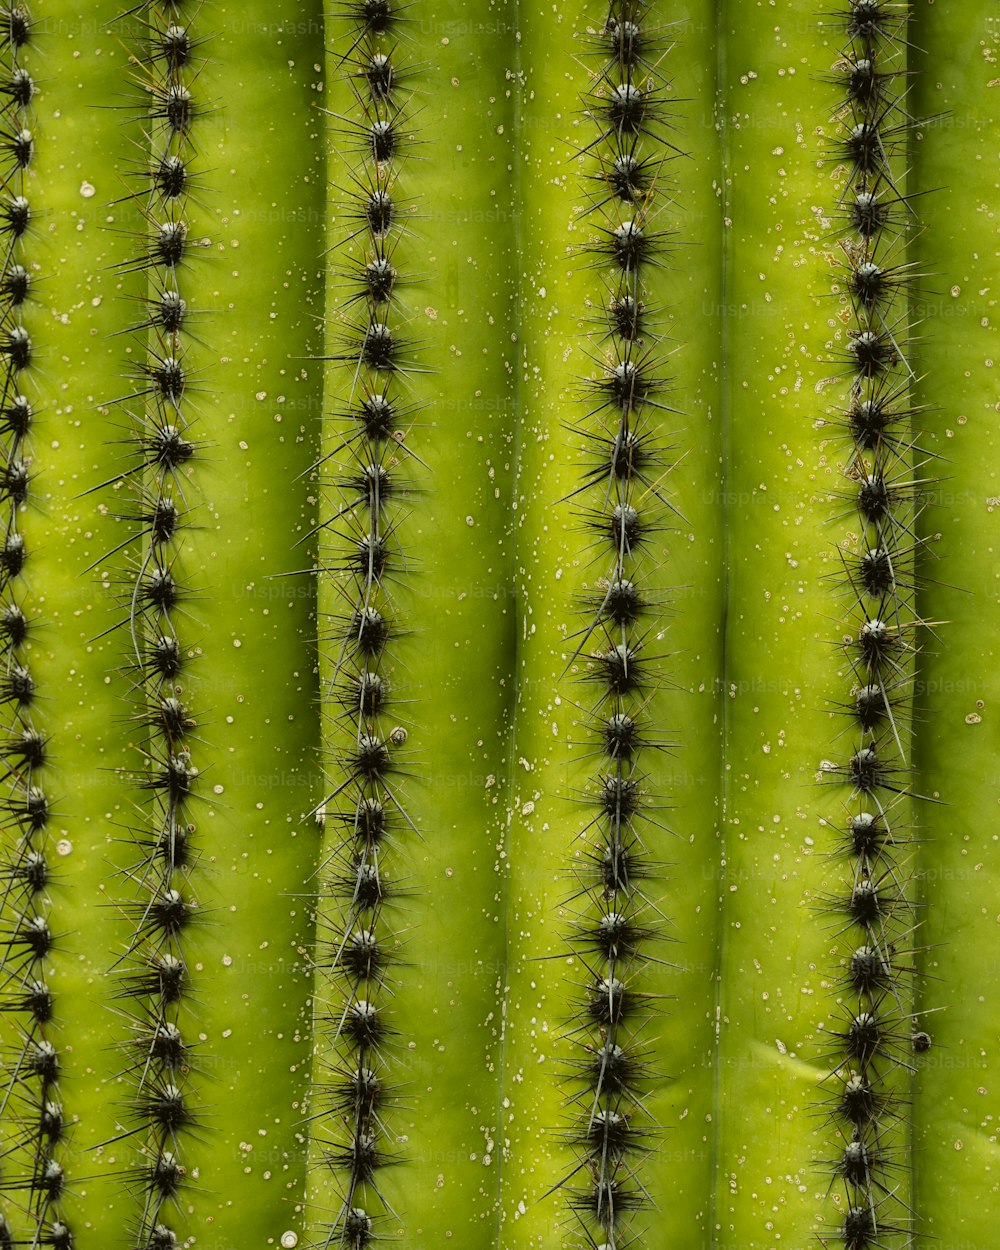 a close up view of a green cactus